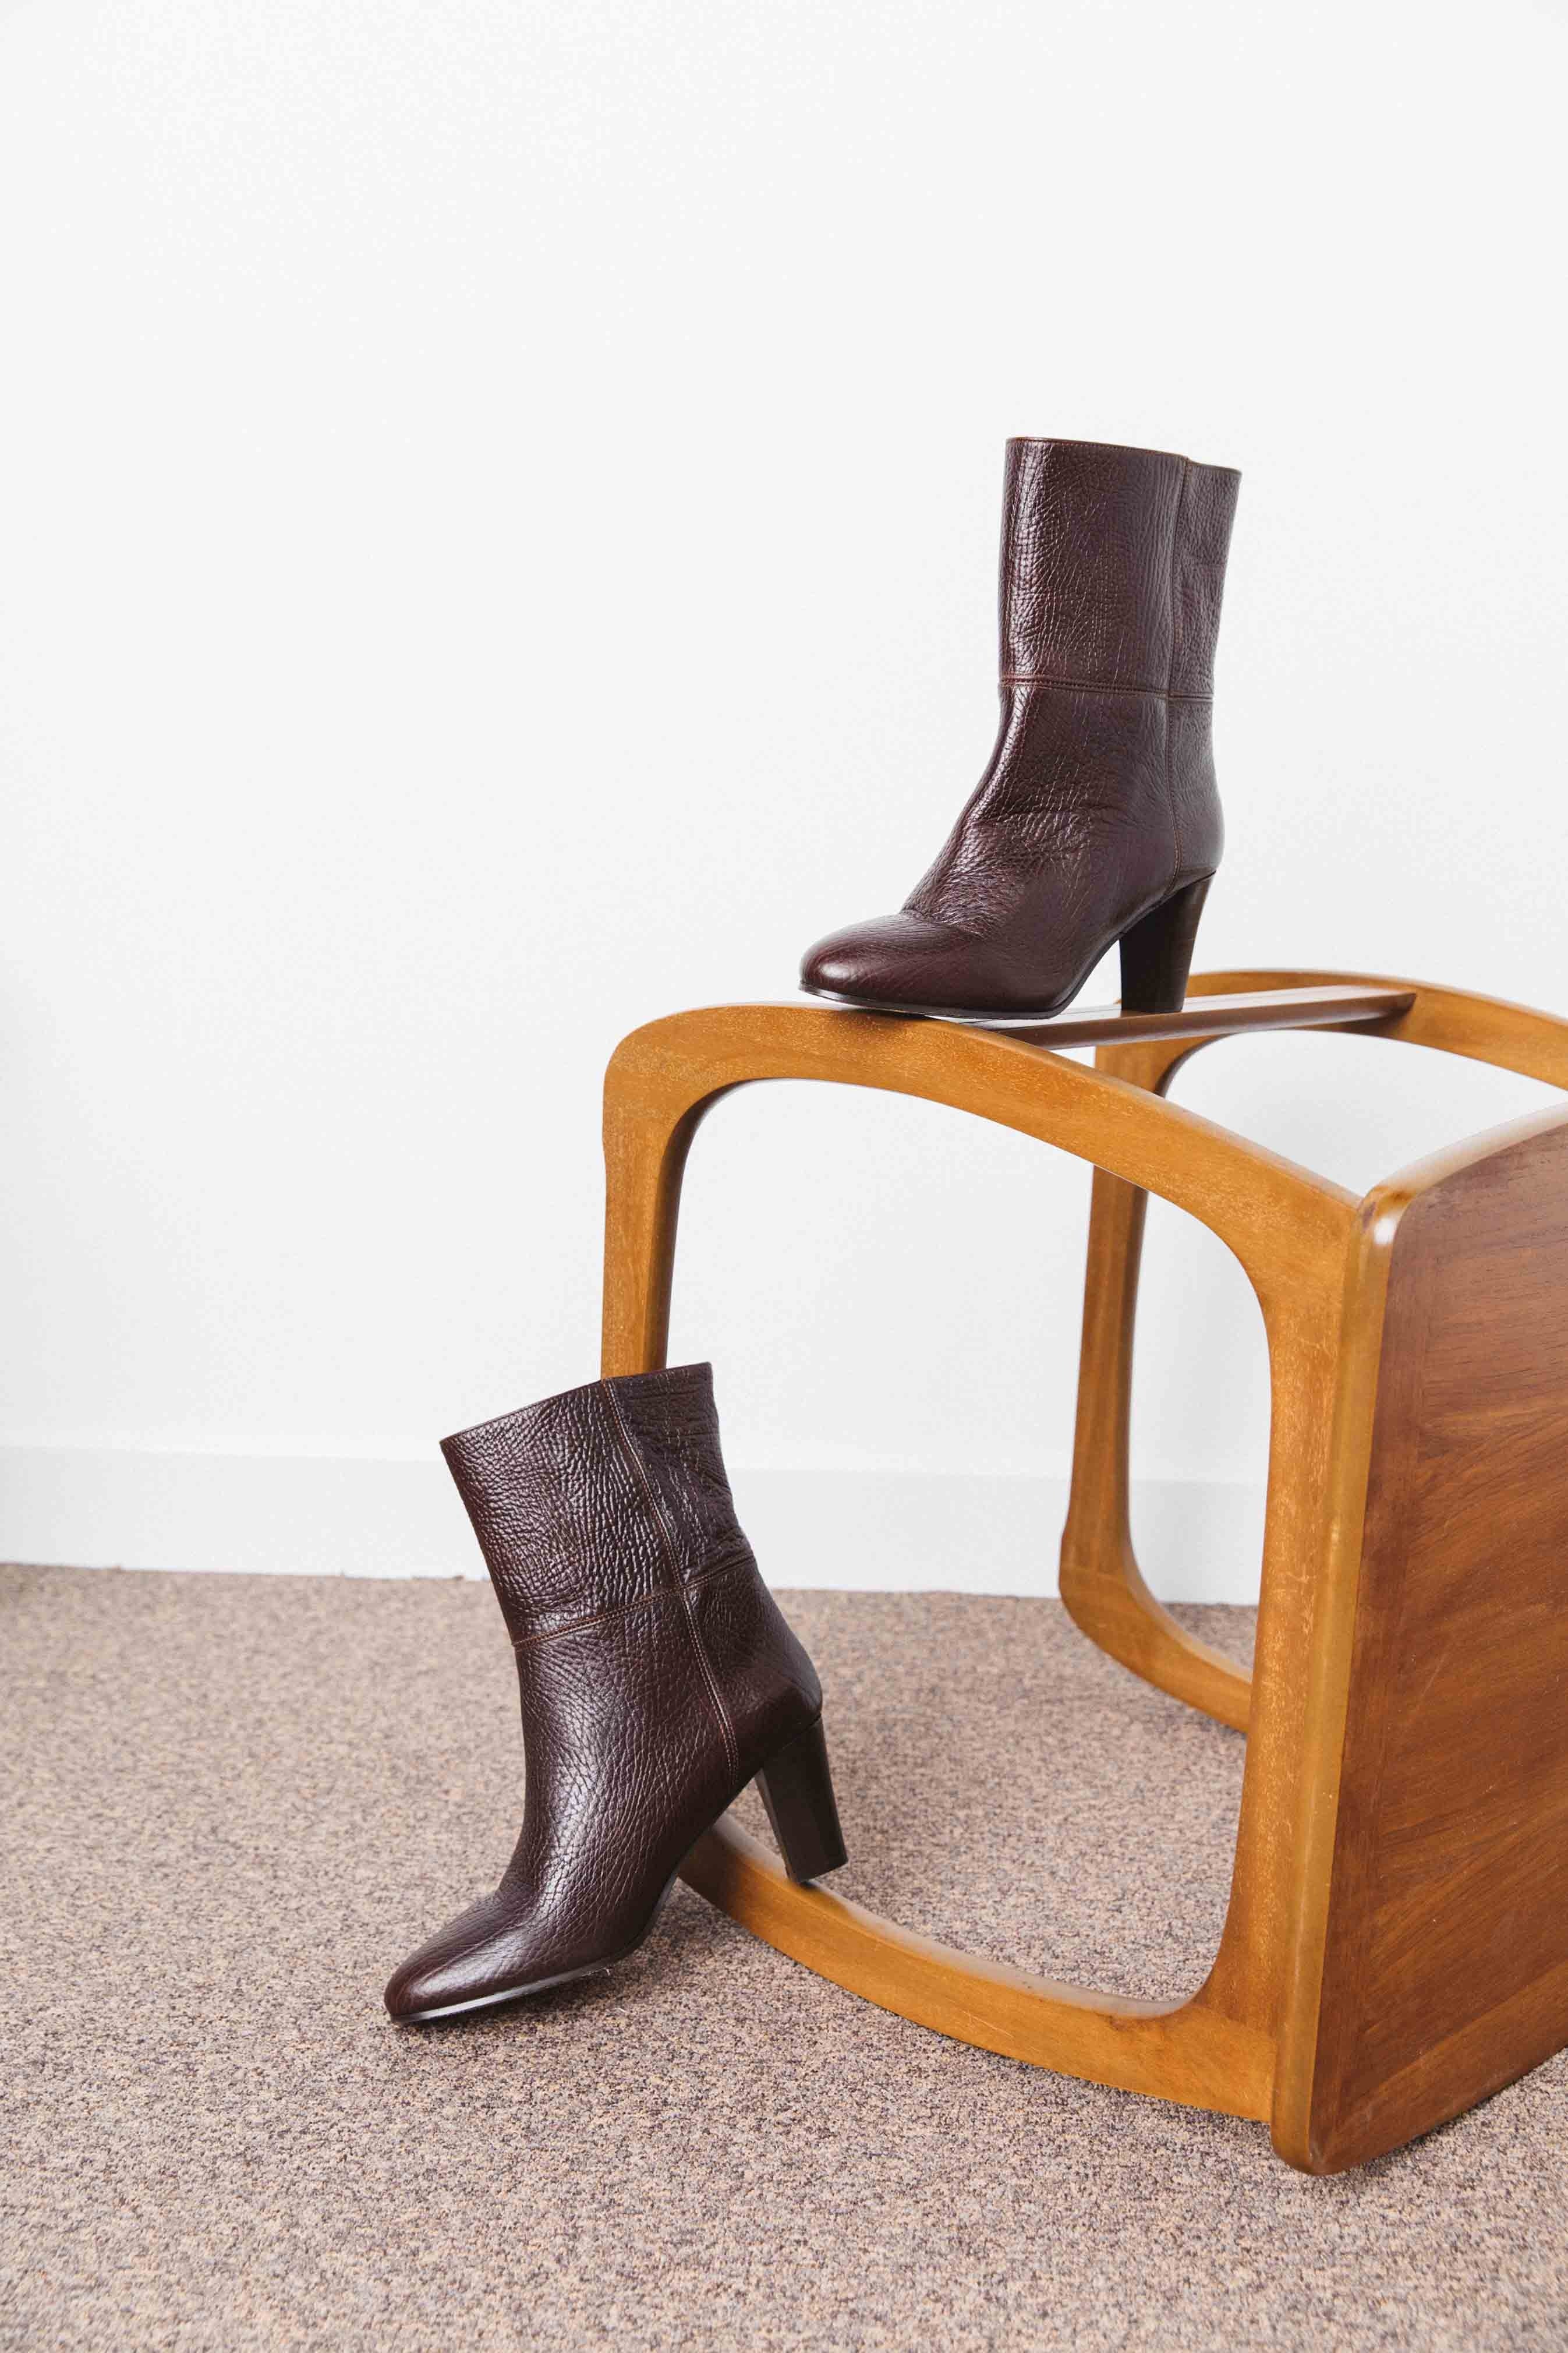 Engraved brown Nivia ankle boots